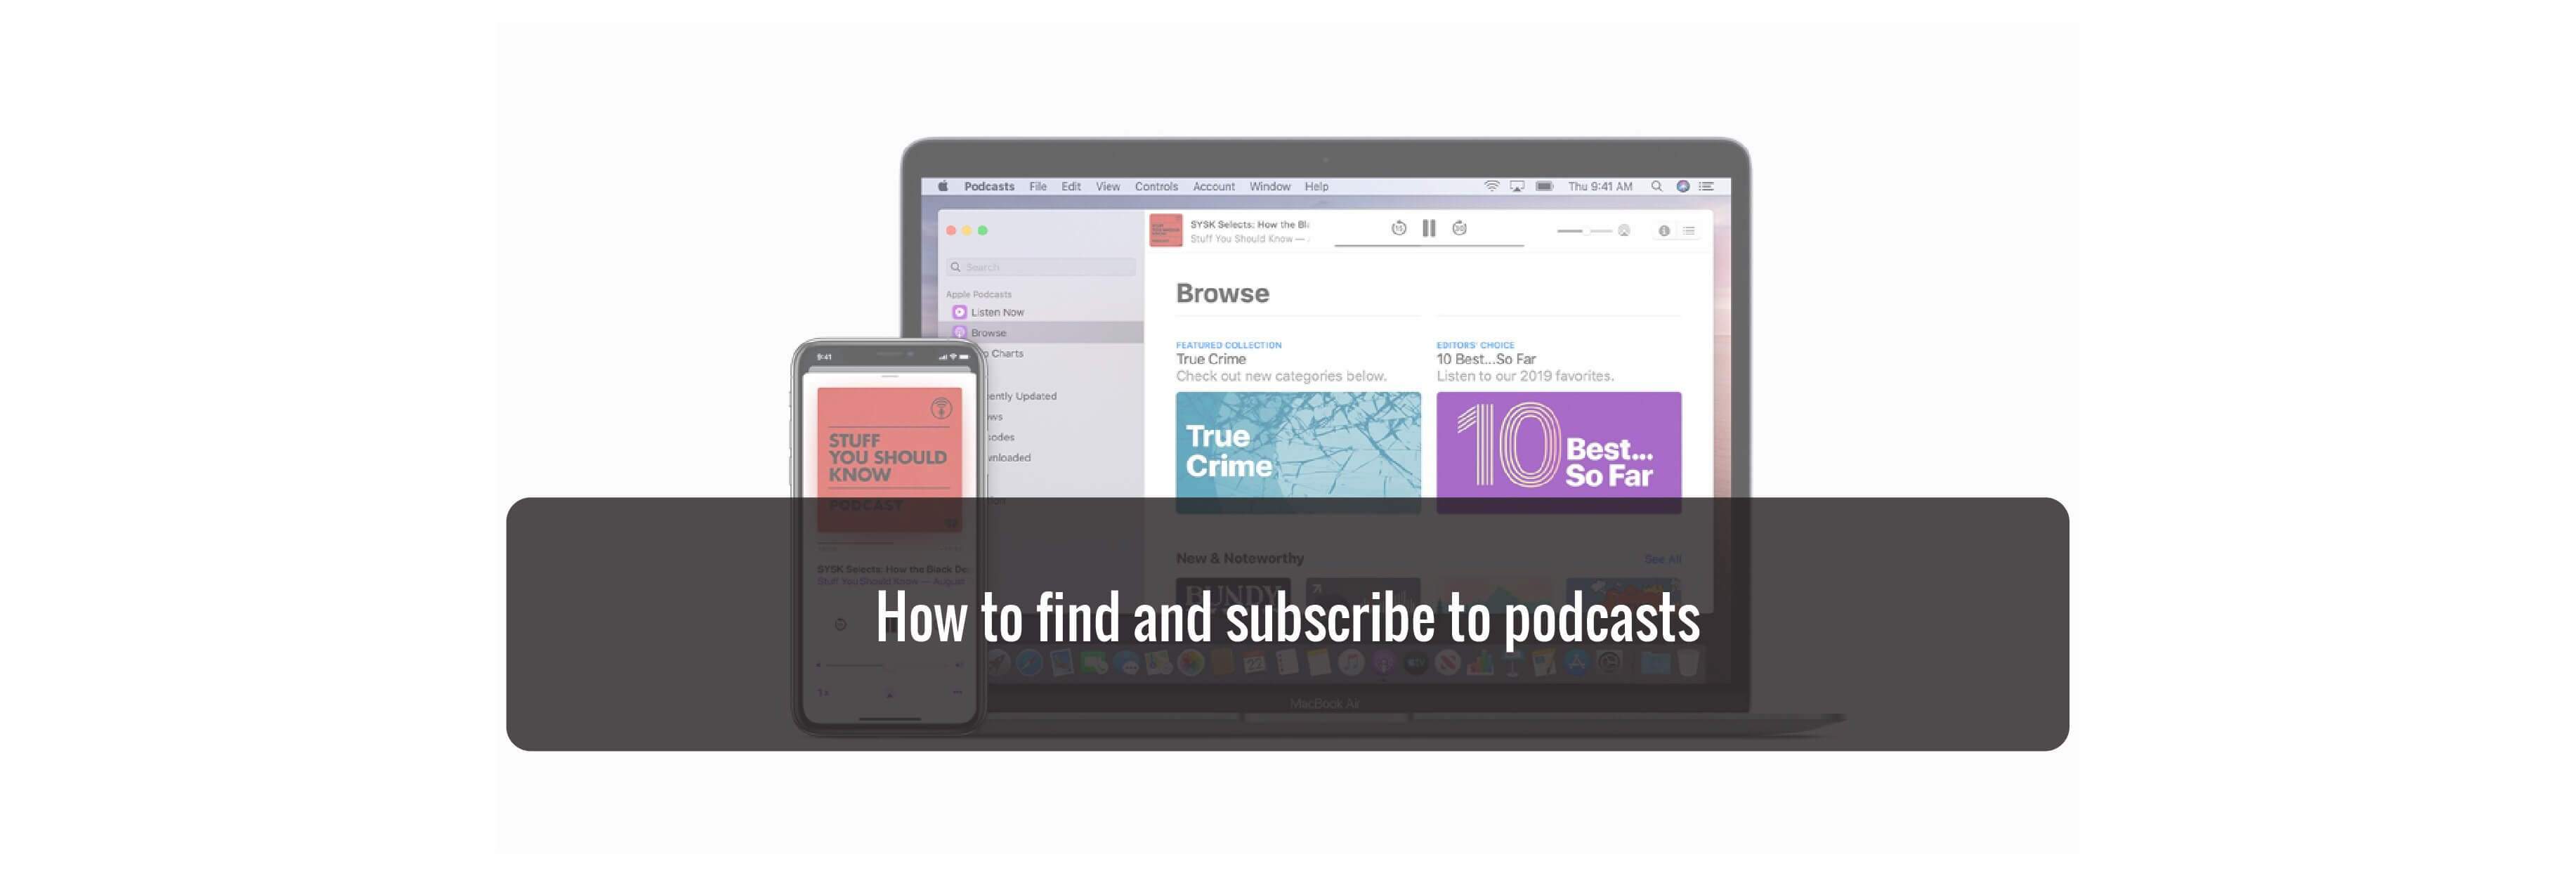 How to find and subscribe to podcasts